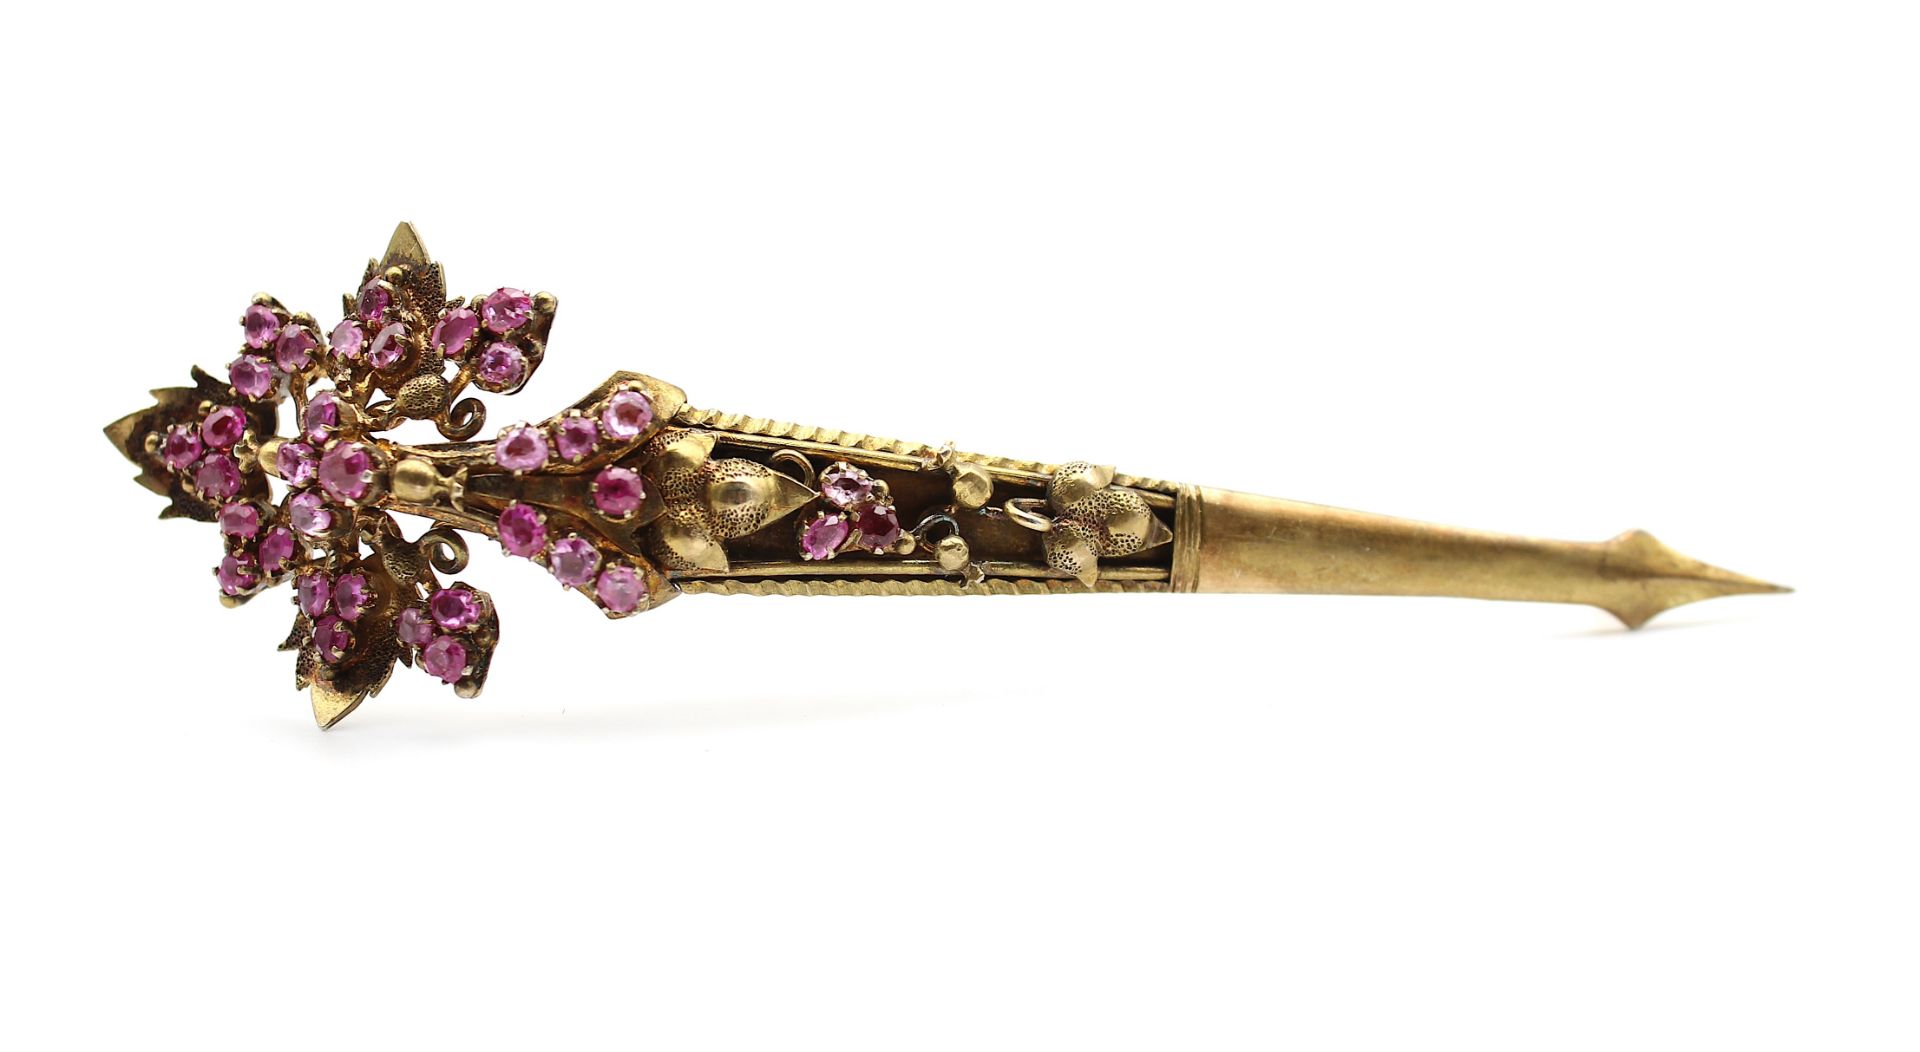 Vintage brooch with pink sapphires - Image 2 of 3